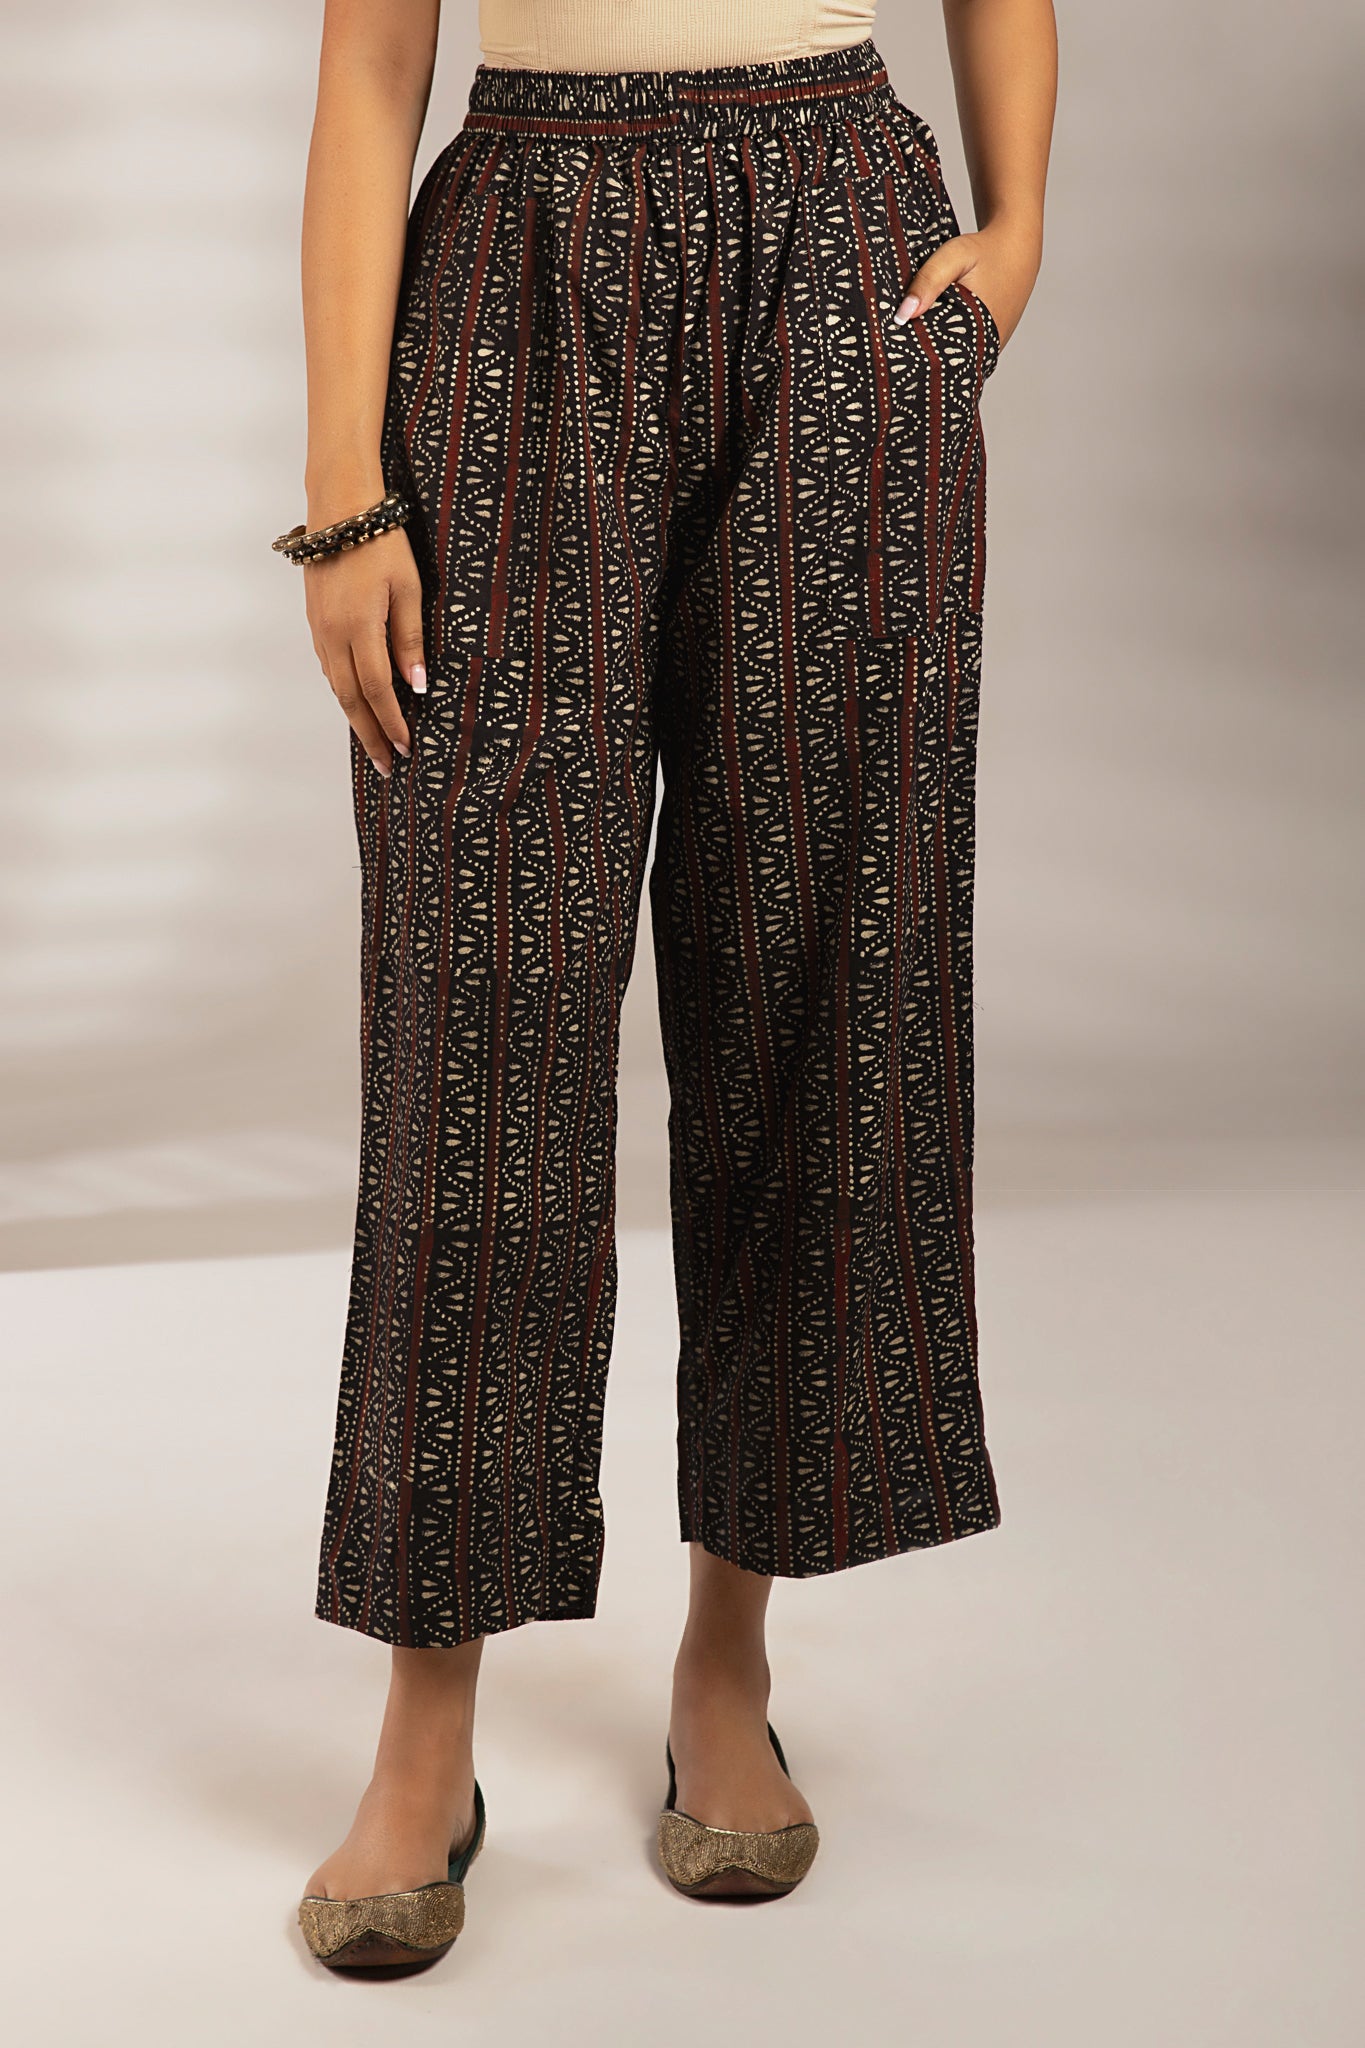 comfort fit cotton printed pants - black red ajrakh butti